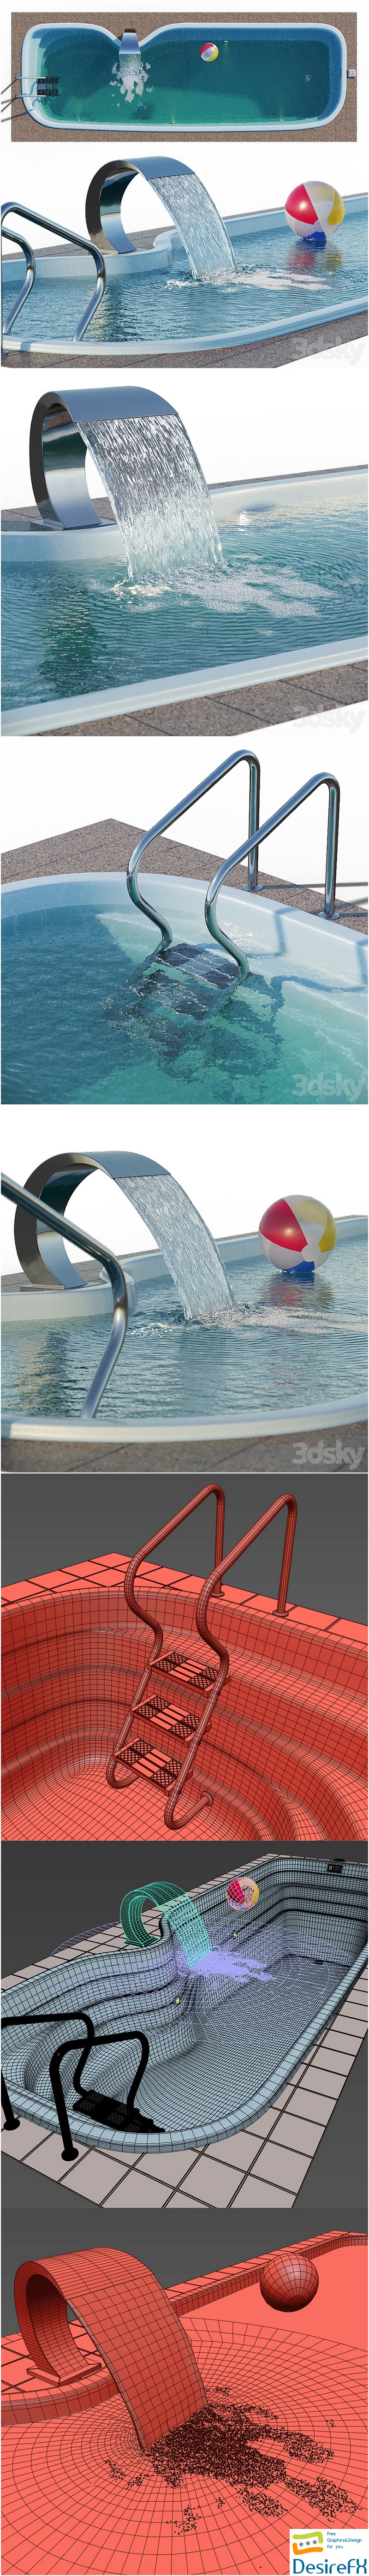 Narbonne composite pool with waterfall 3D Model